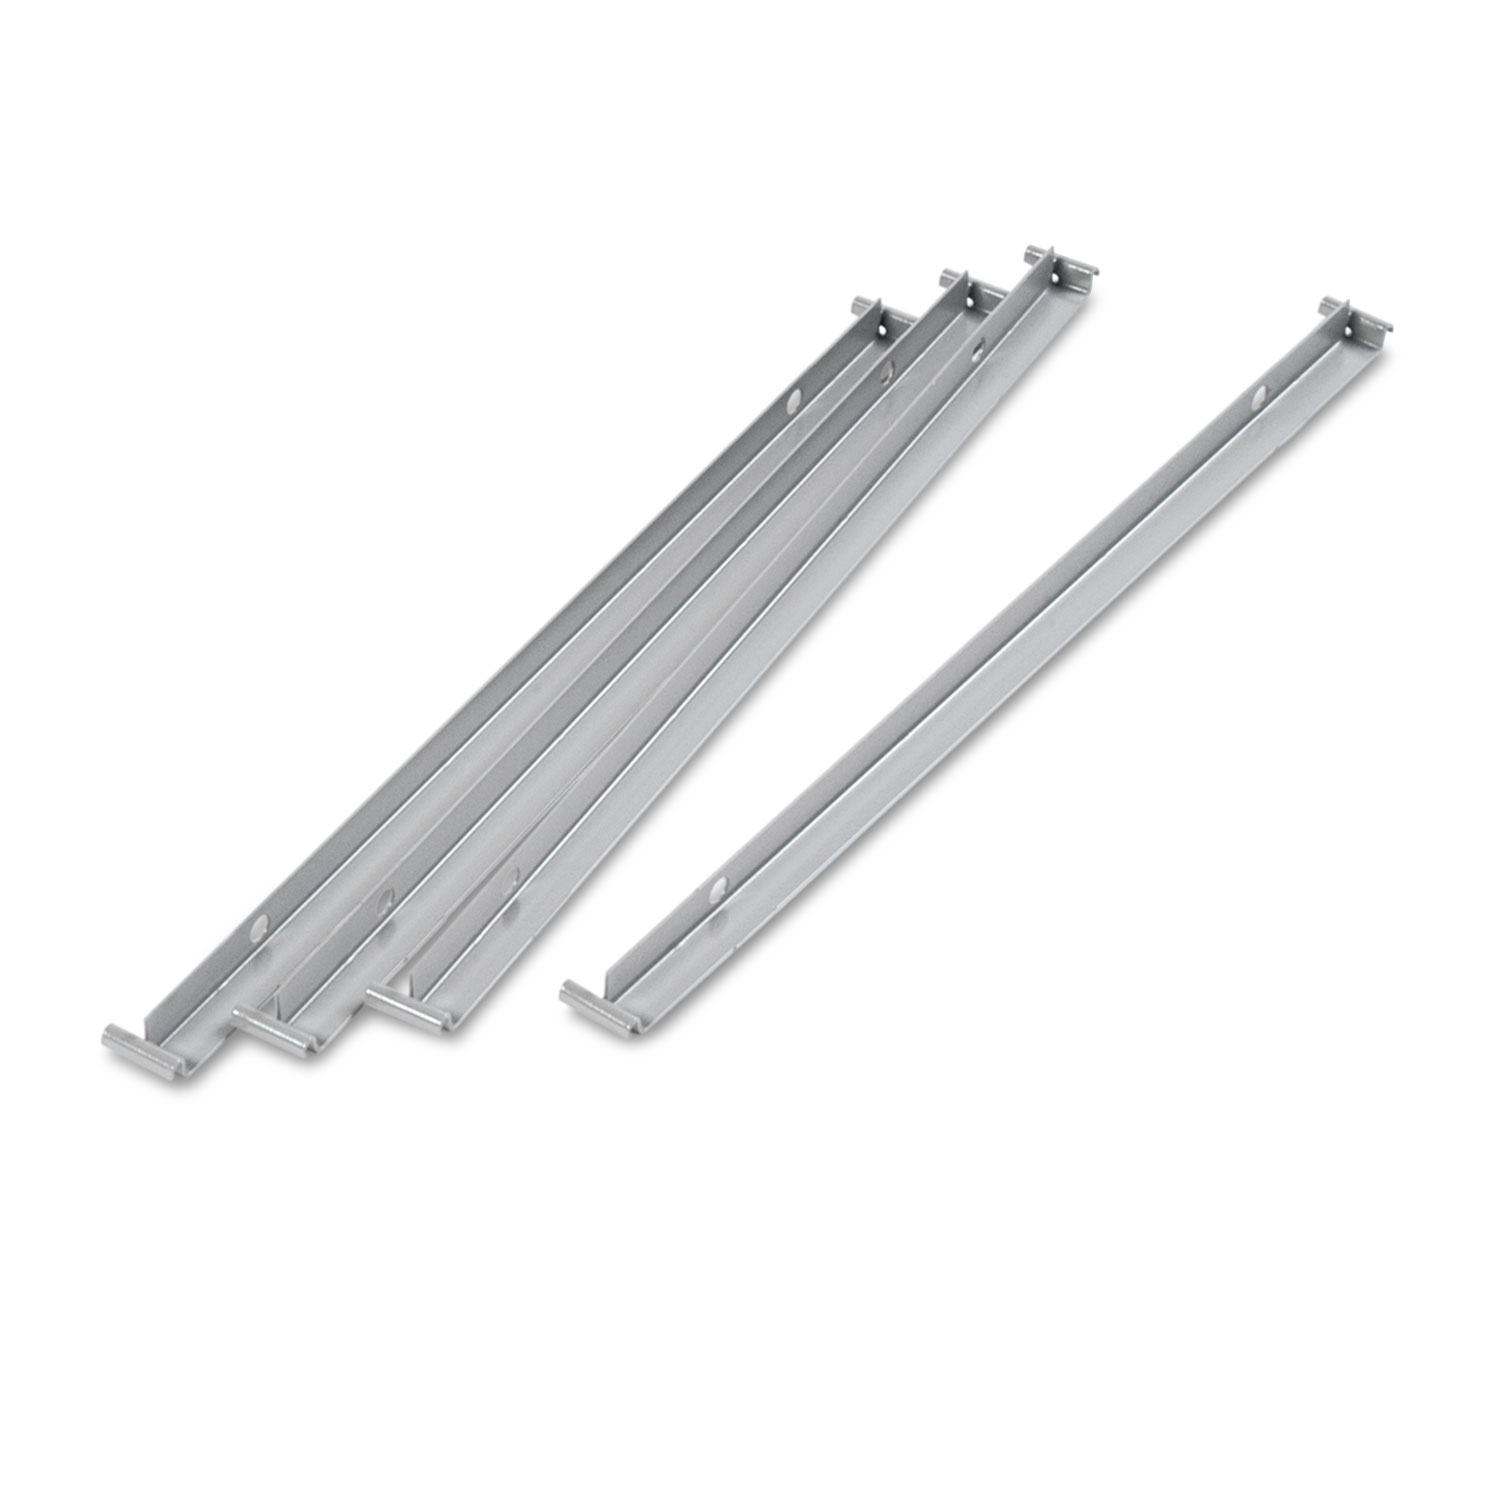  Alera ALELF3036 Two Row Hangrails for 30 or 36 Files, Aluminum, 4/Pack (ALELF3036) 